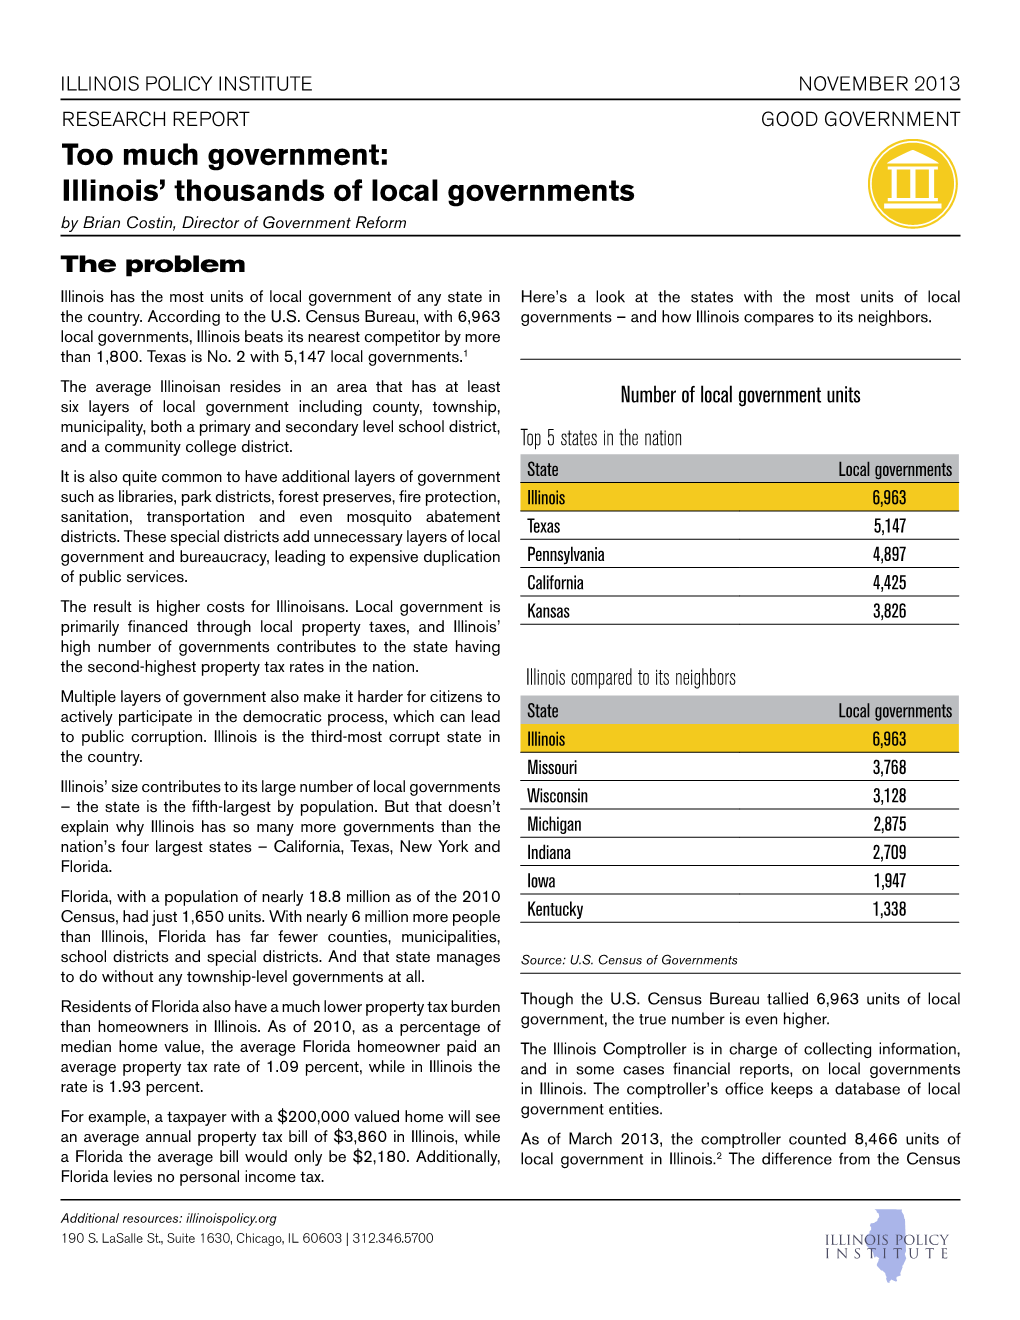 Too Much Government: Illinois' Thousands of Local Governments